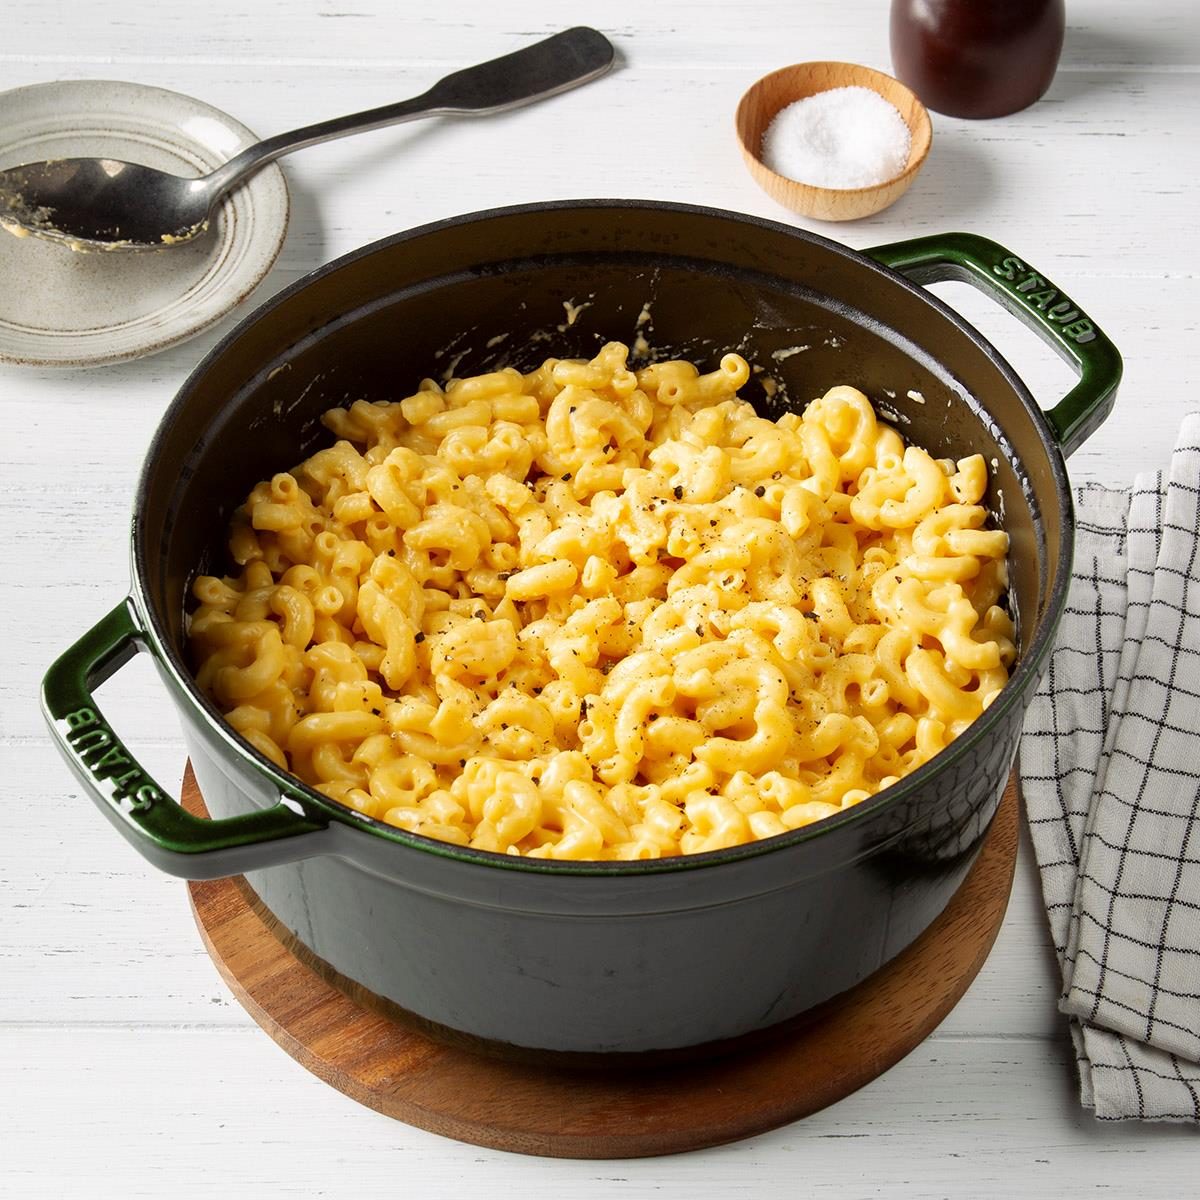 https://www.tasteofhome.com/wp-content/uploads/0001/01/One-Pot-Mac-and-Cheese_EXPS_FT19_197484_F_1213_1.jpg?fit=700%2C1024